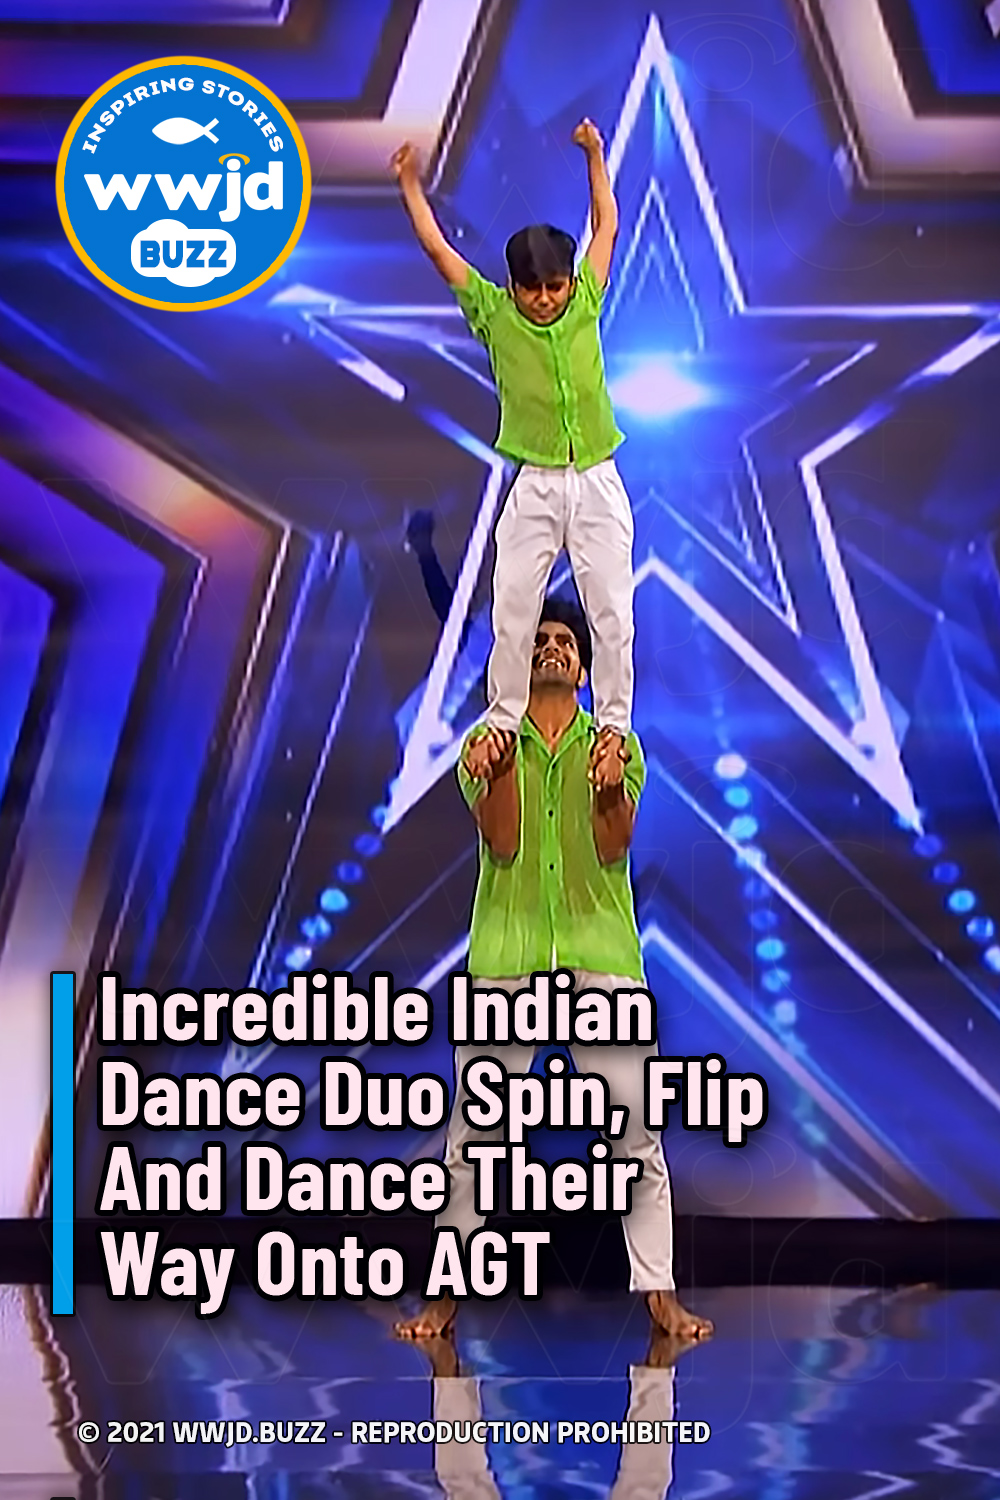 Incredible Indian Dance Duo Spin, Flip And Dance Their Way Onto AGT